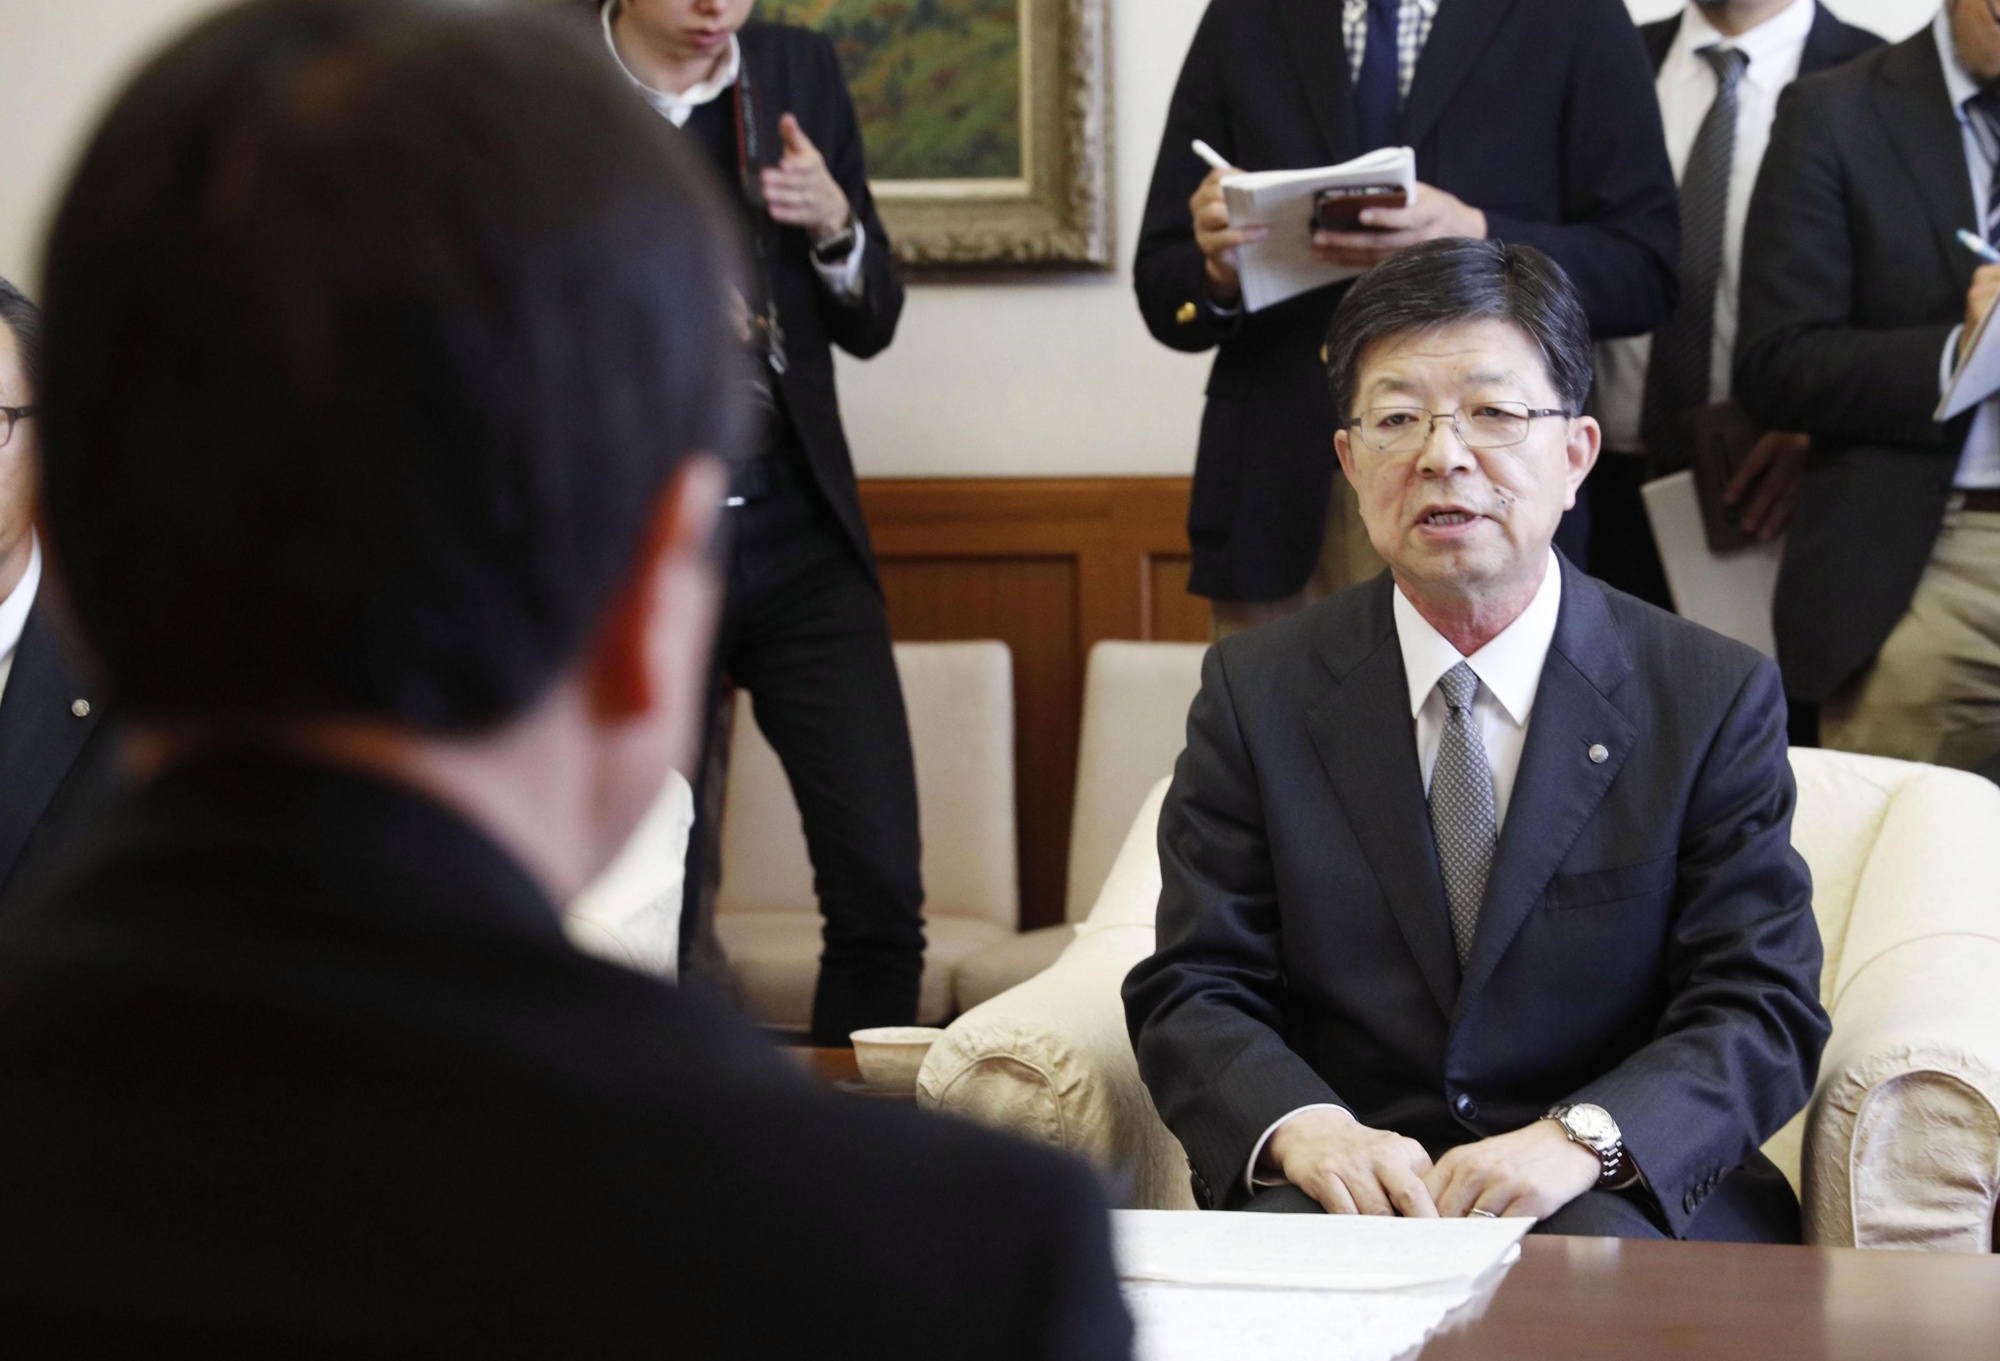 Tohoku Electric Power Co. President Hiroya Harada explains the decision to scrap the idled No. 1 unit at its Onagawa nuclear power plant during a meeting at the Miyagi Prefectural Government office on Thursday. | KYODO